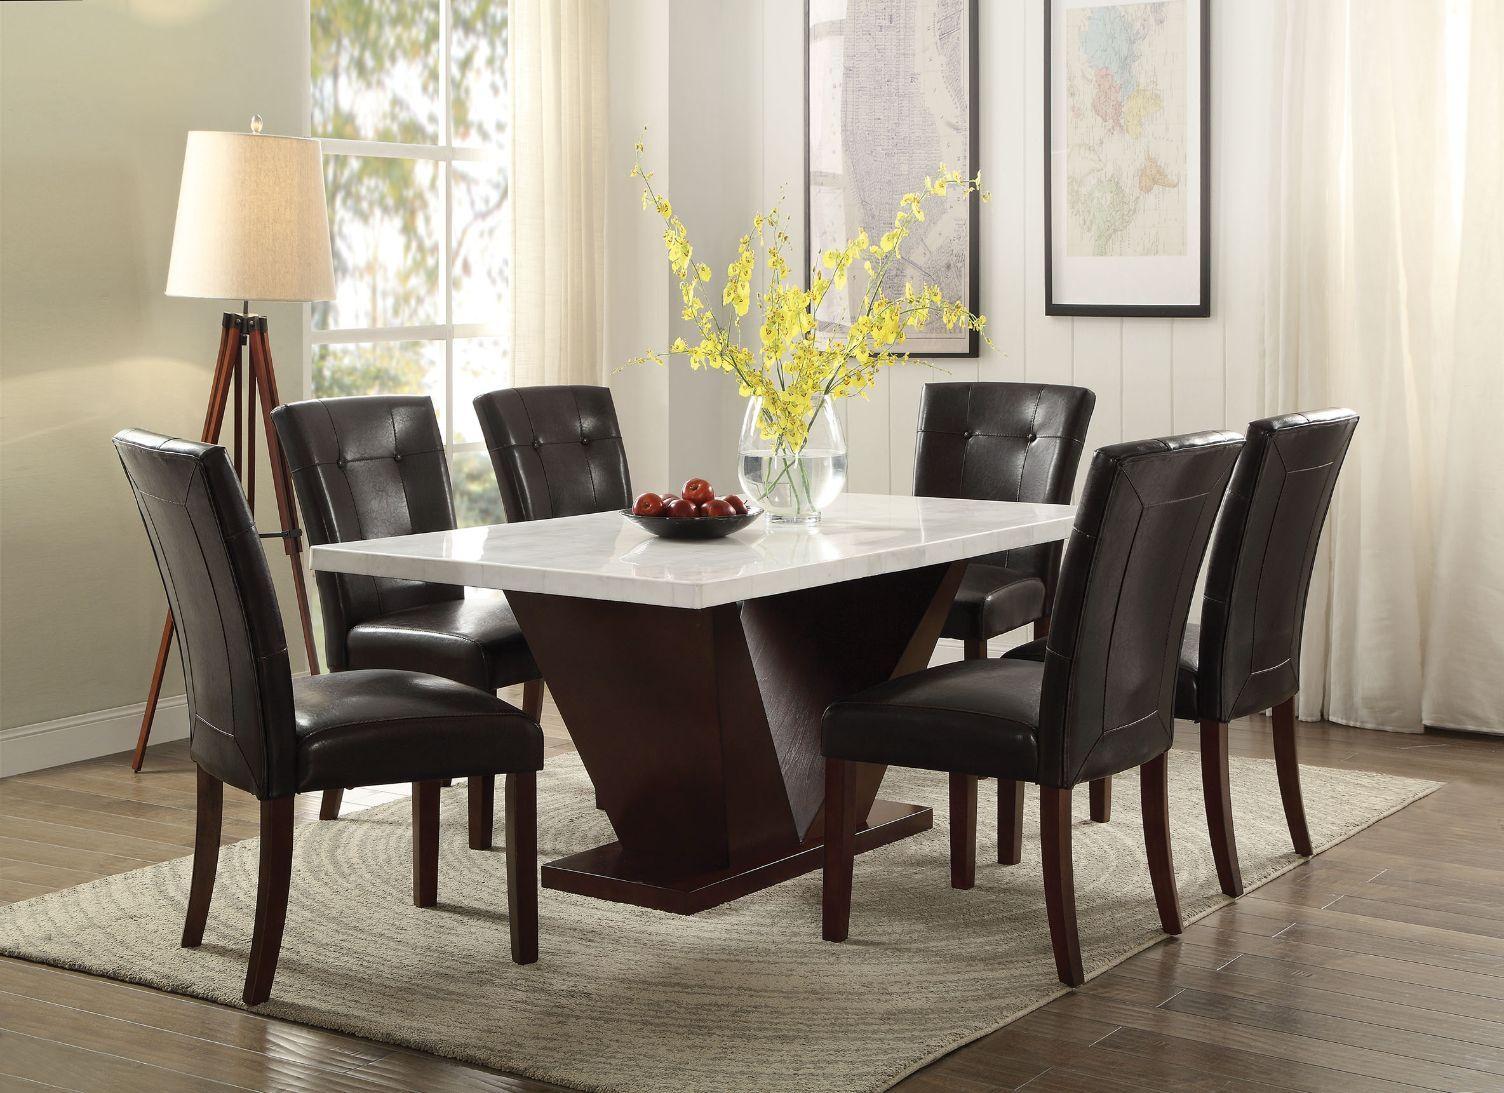 

    
Contemporary White Marble & Walnut 7pcs Dining Room Set by Acme Forbes 72120-7pcs
